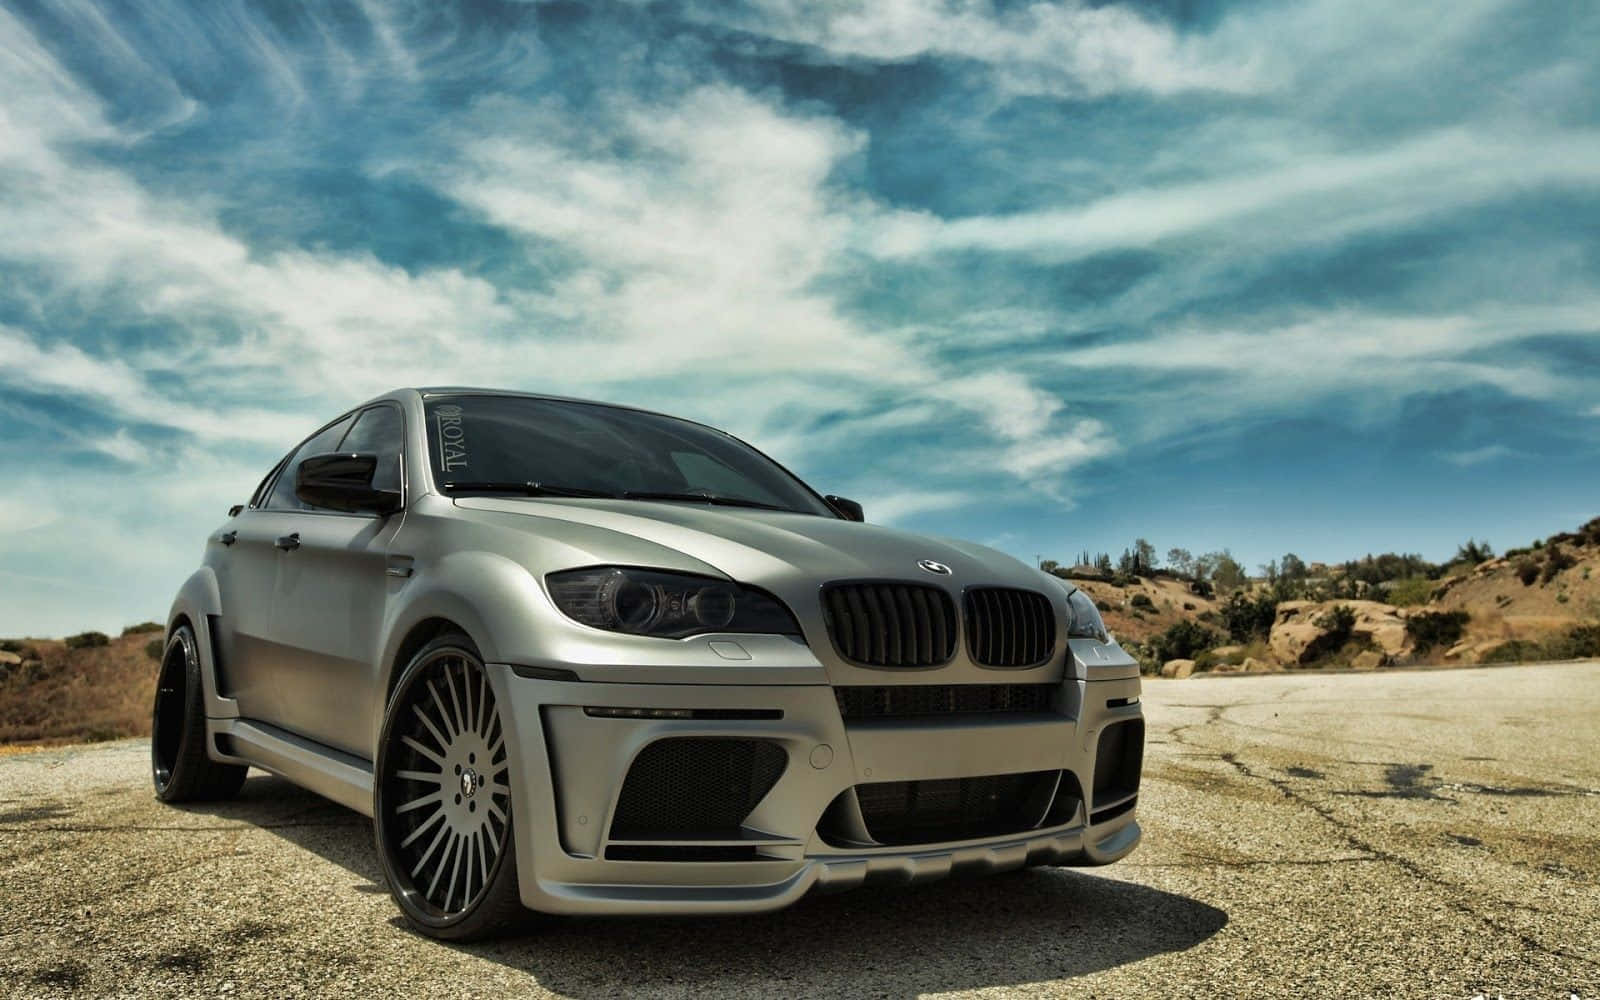 Sleek and Powerful - The BMW X6 in Action Wallpaper